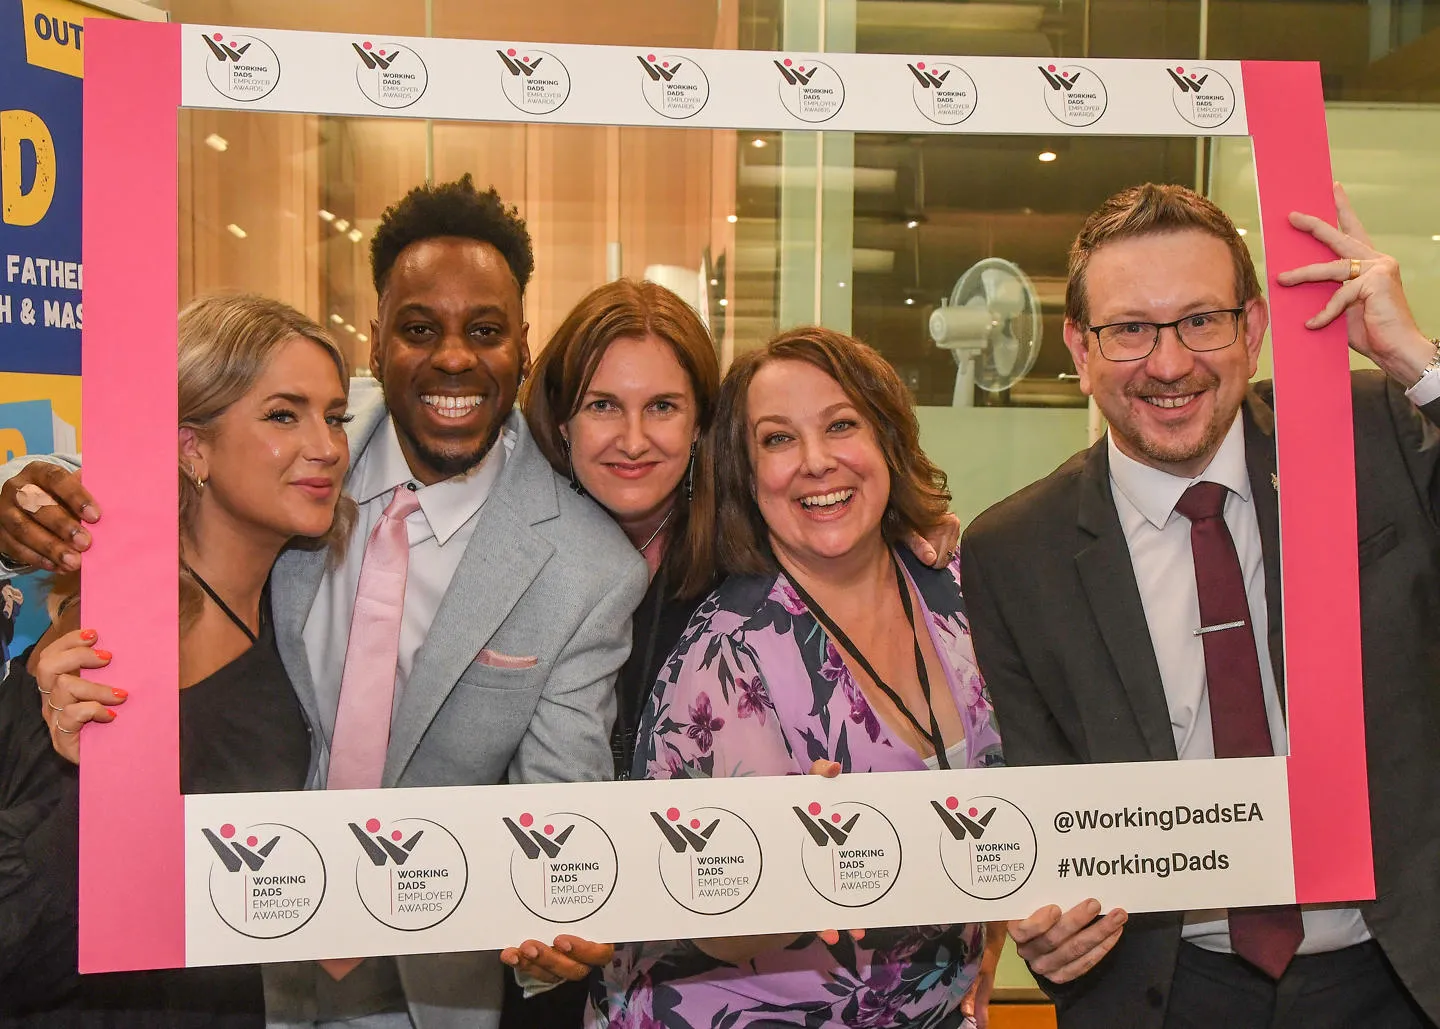  A group of people at the Working Dads Employers Awards holding a branded frame around themselves